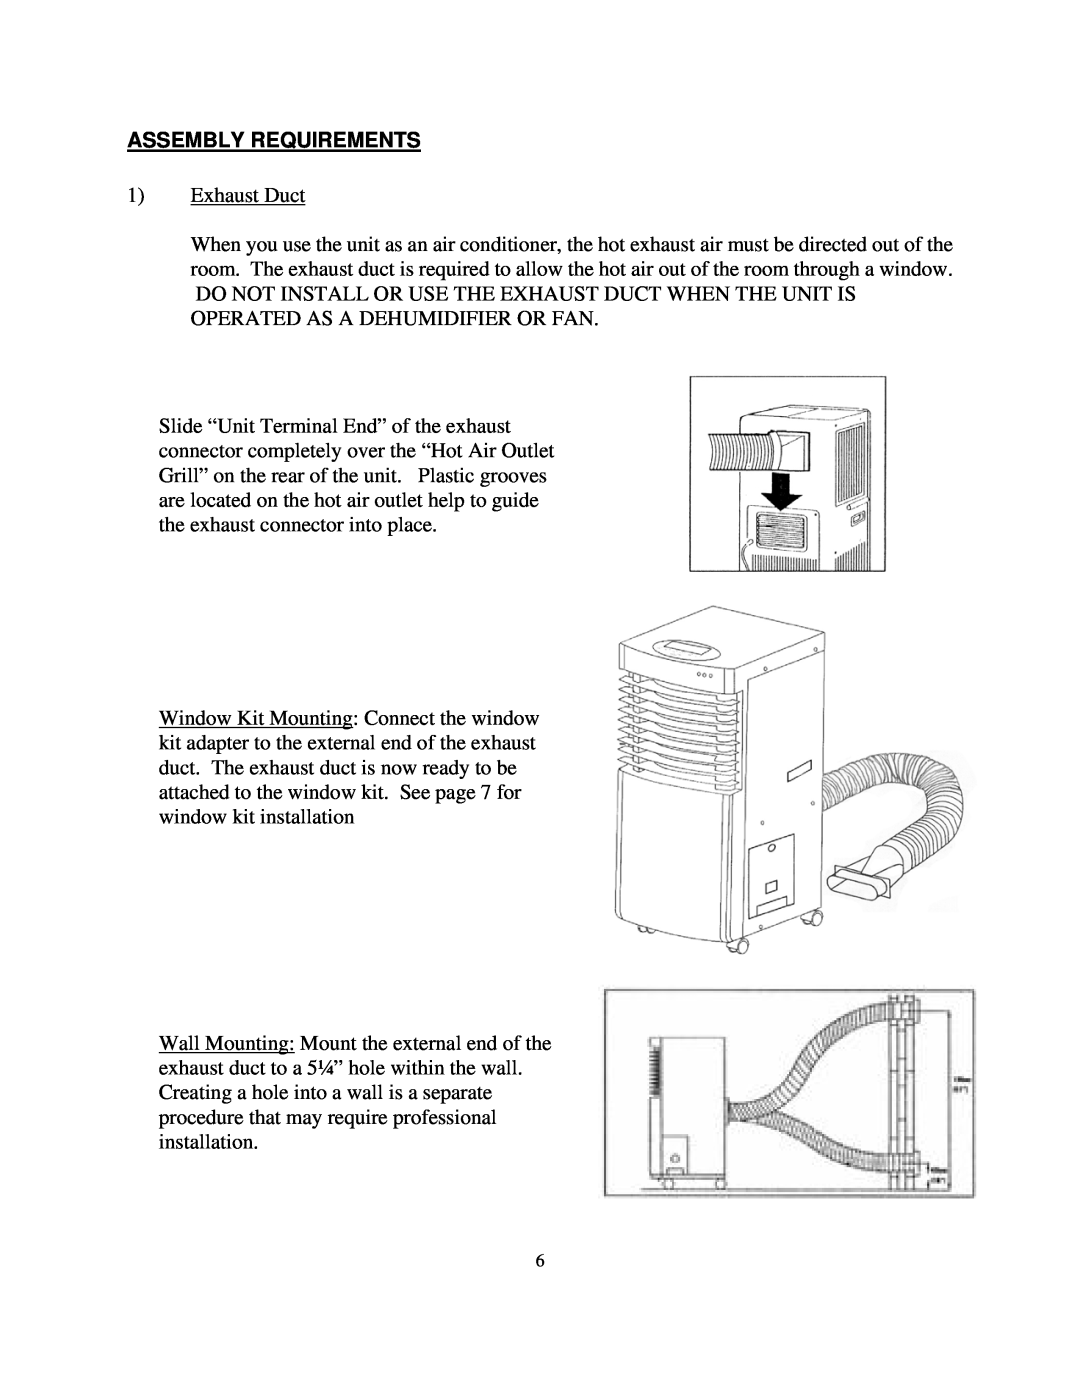 Soleus Air MA-9000AH owner manual Assembly Requirements 